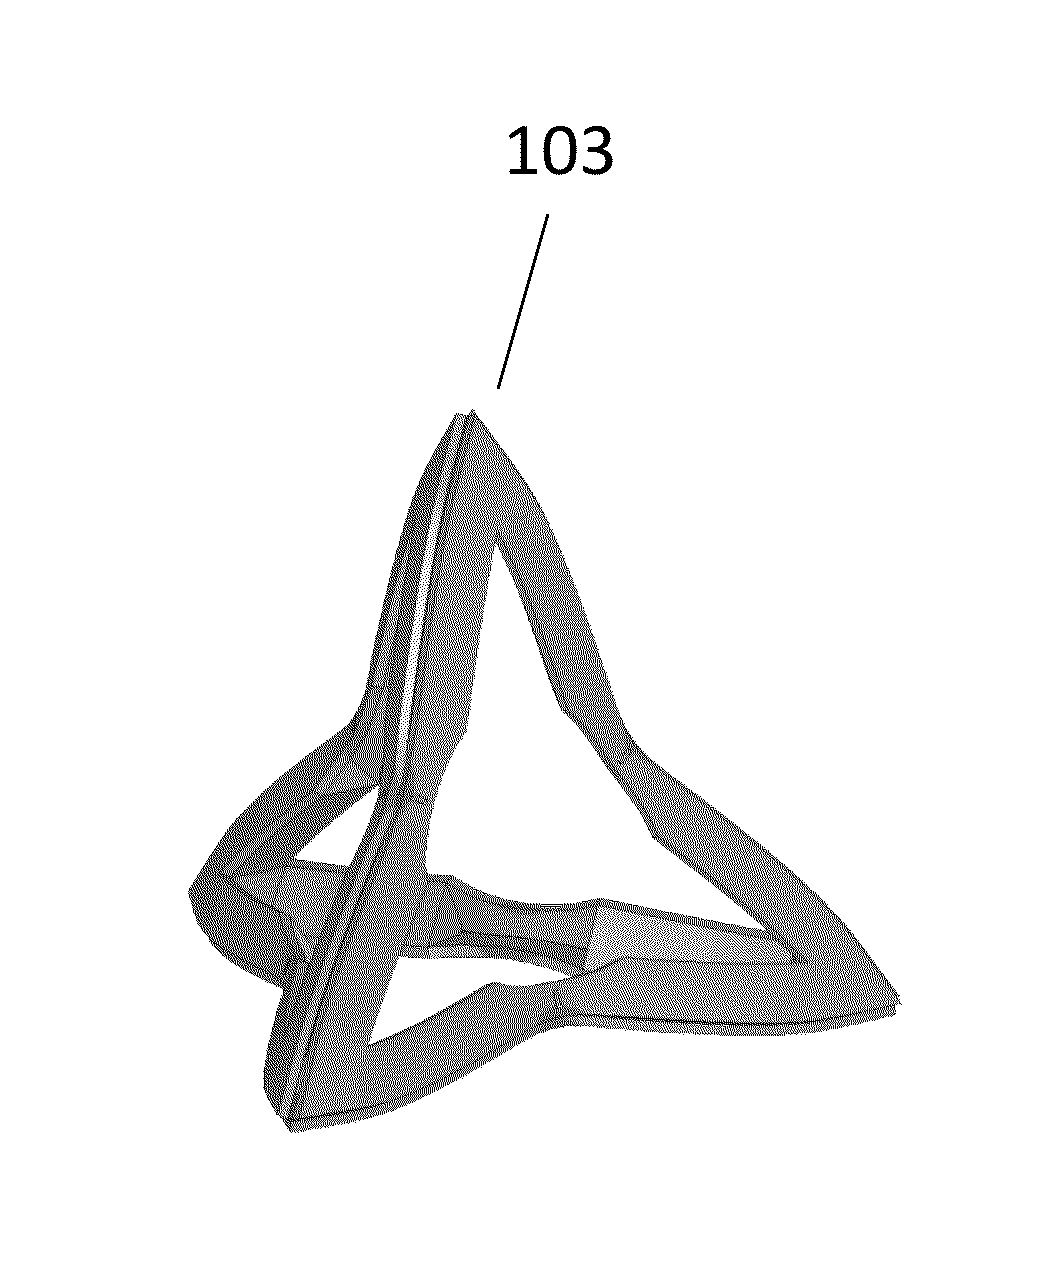 Apparatus and method for sand consolidation